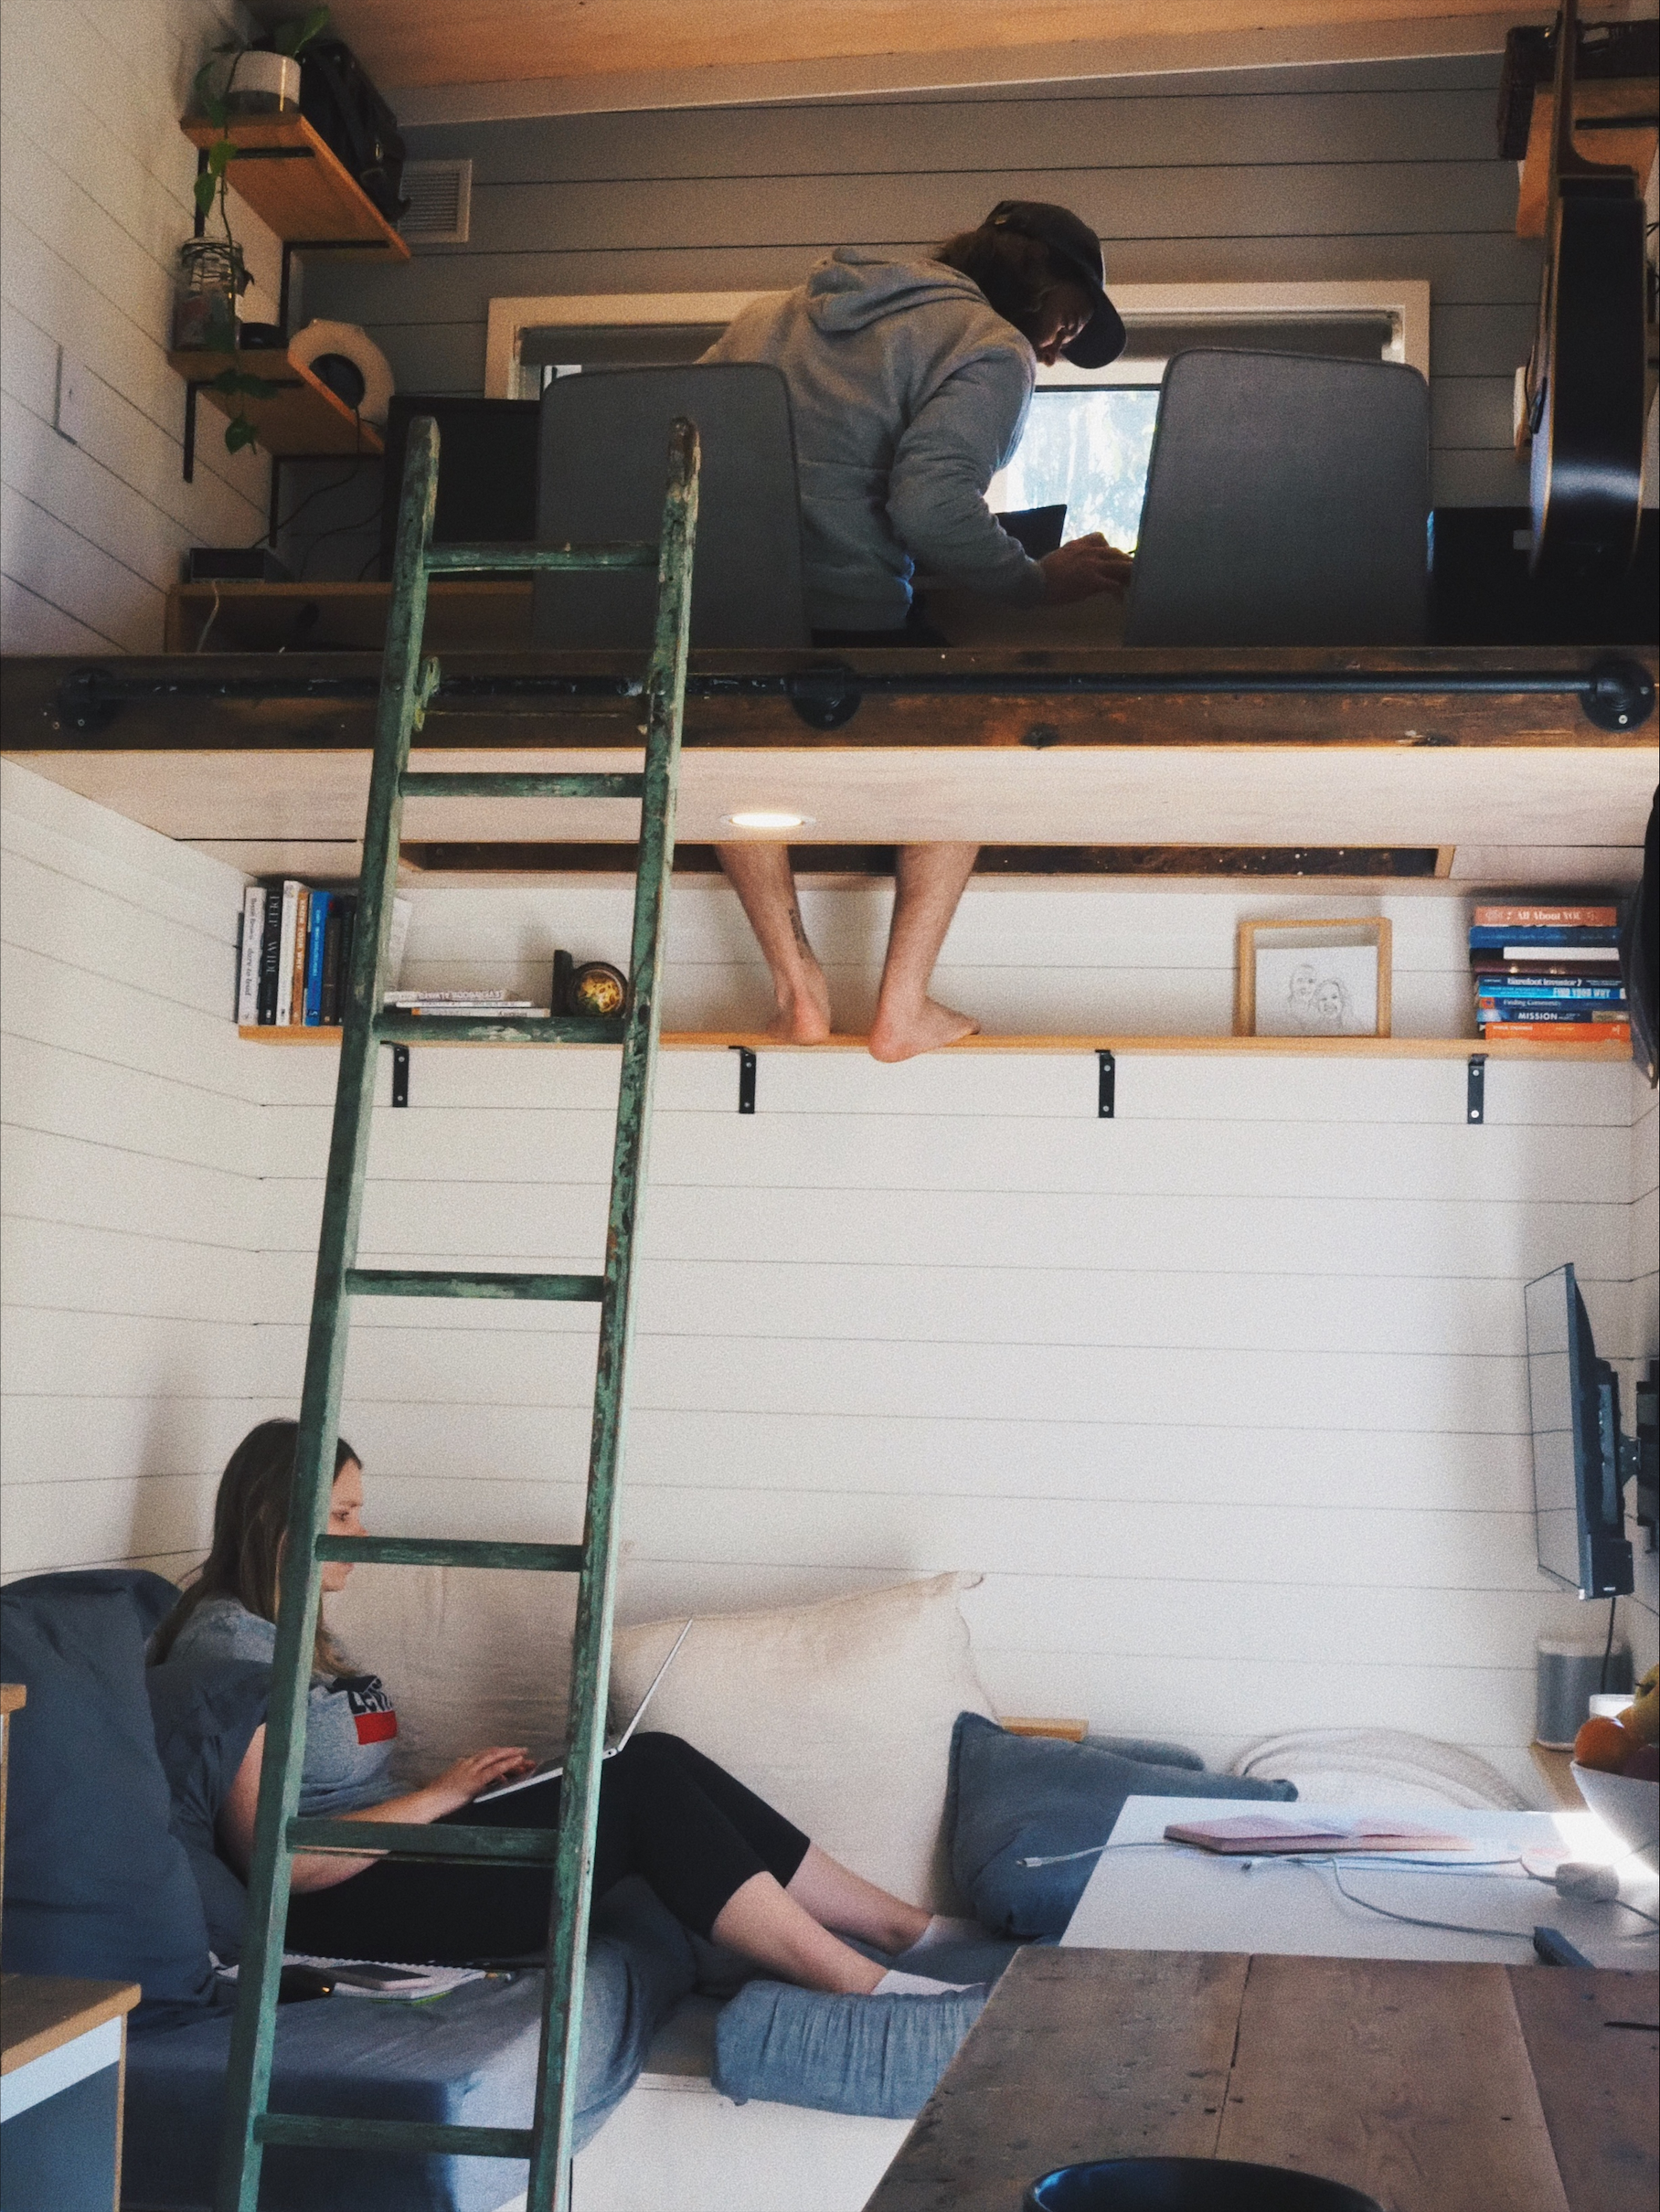 A young woman sitting on a couch works on her laptop while above her on a wooden platform a young man sits in a makeshift study.